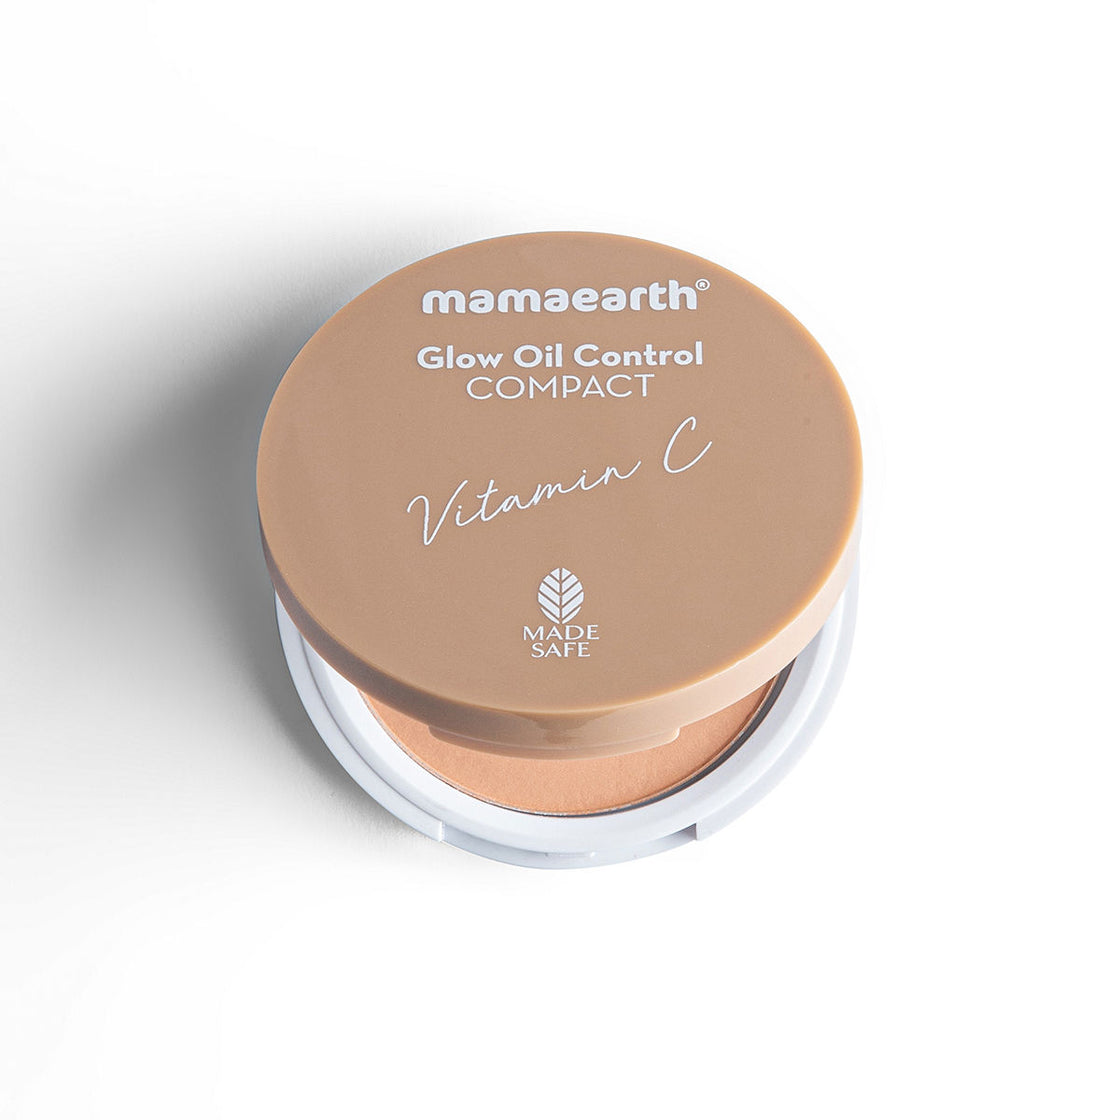 Mamaearth Glow Oil Control Compact Spf 30 With Vitamin C & Turmeric - 01 Ivory Glow